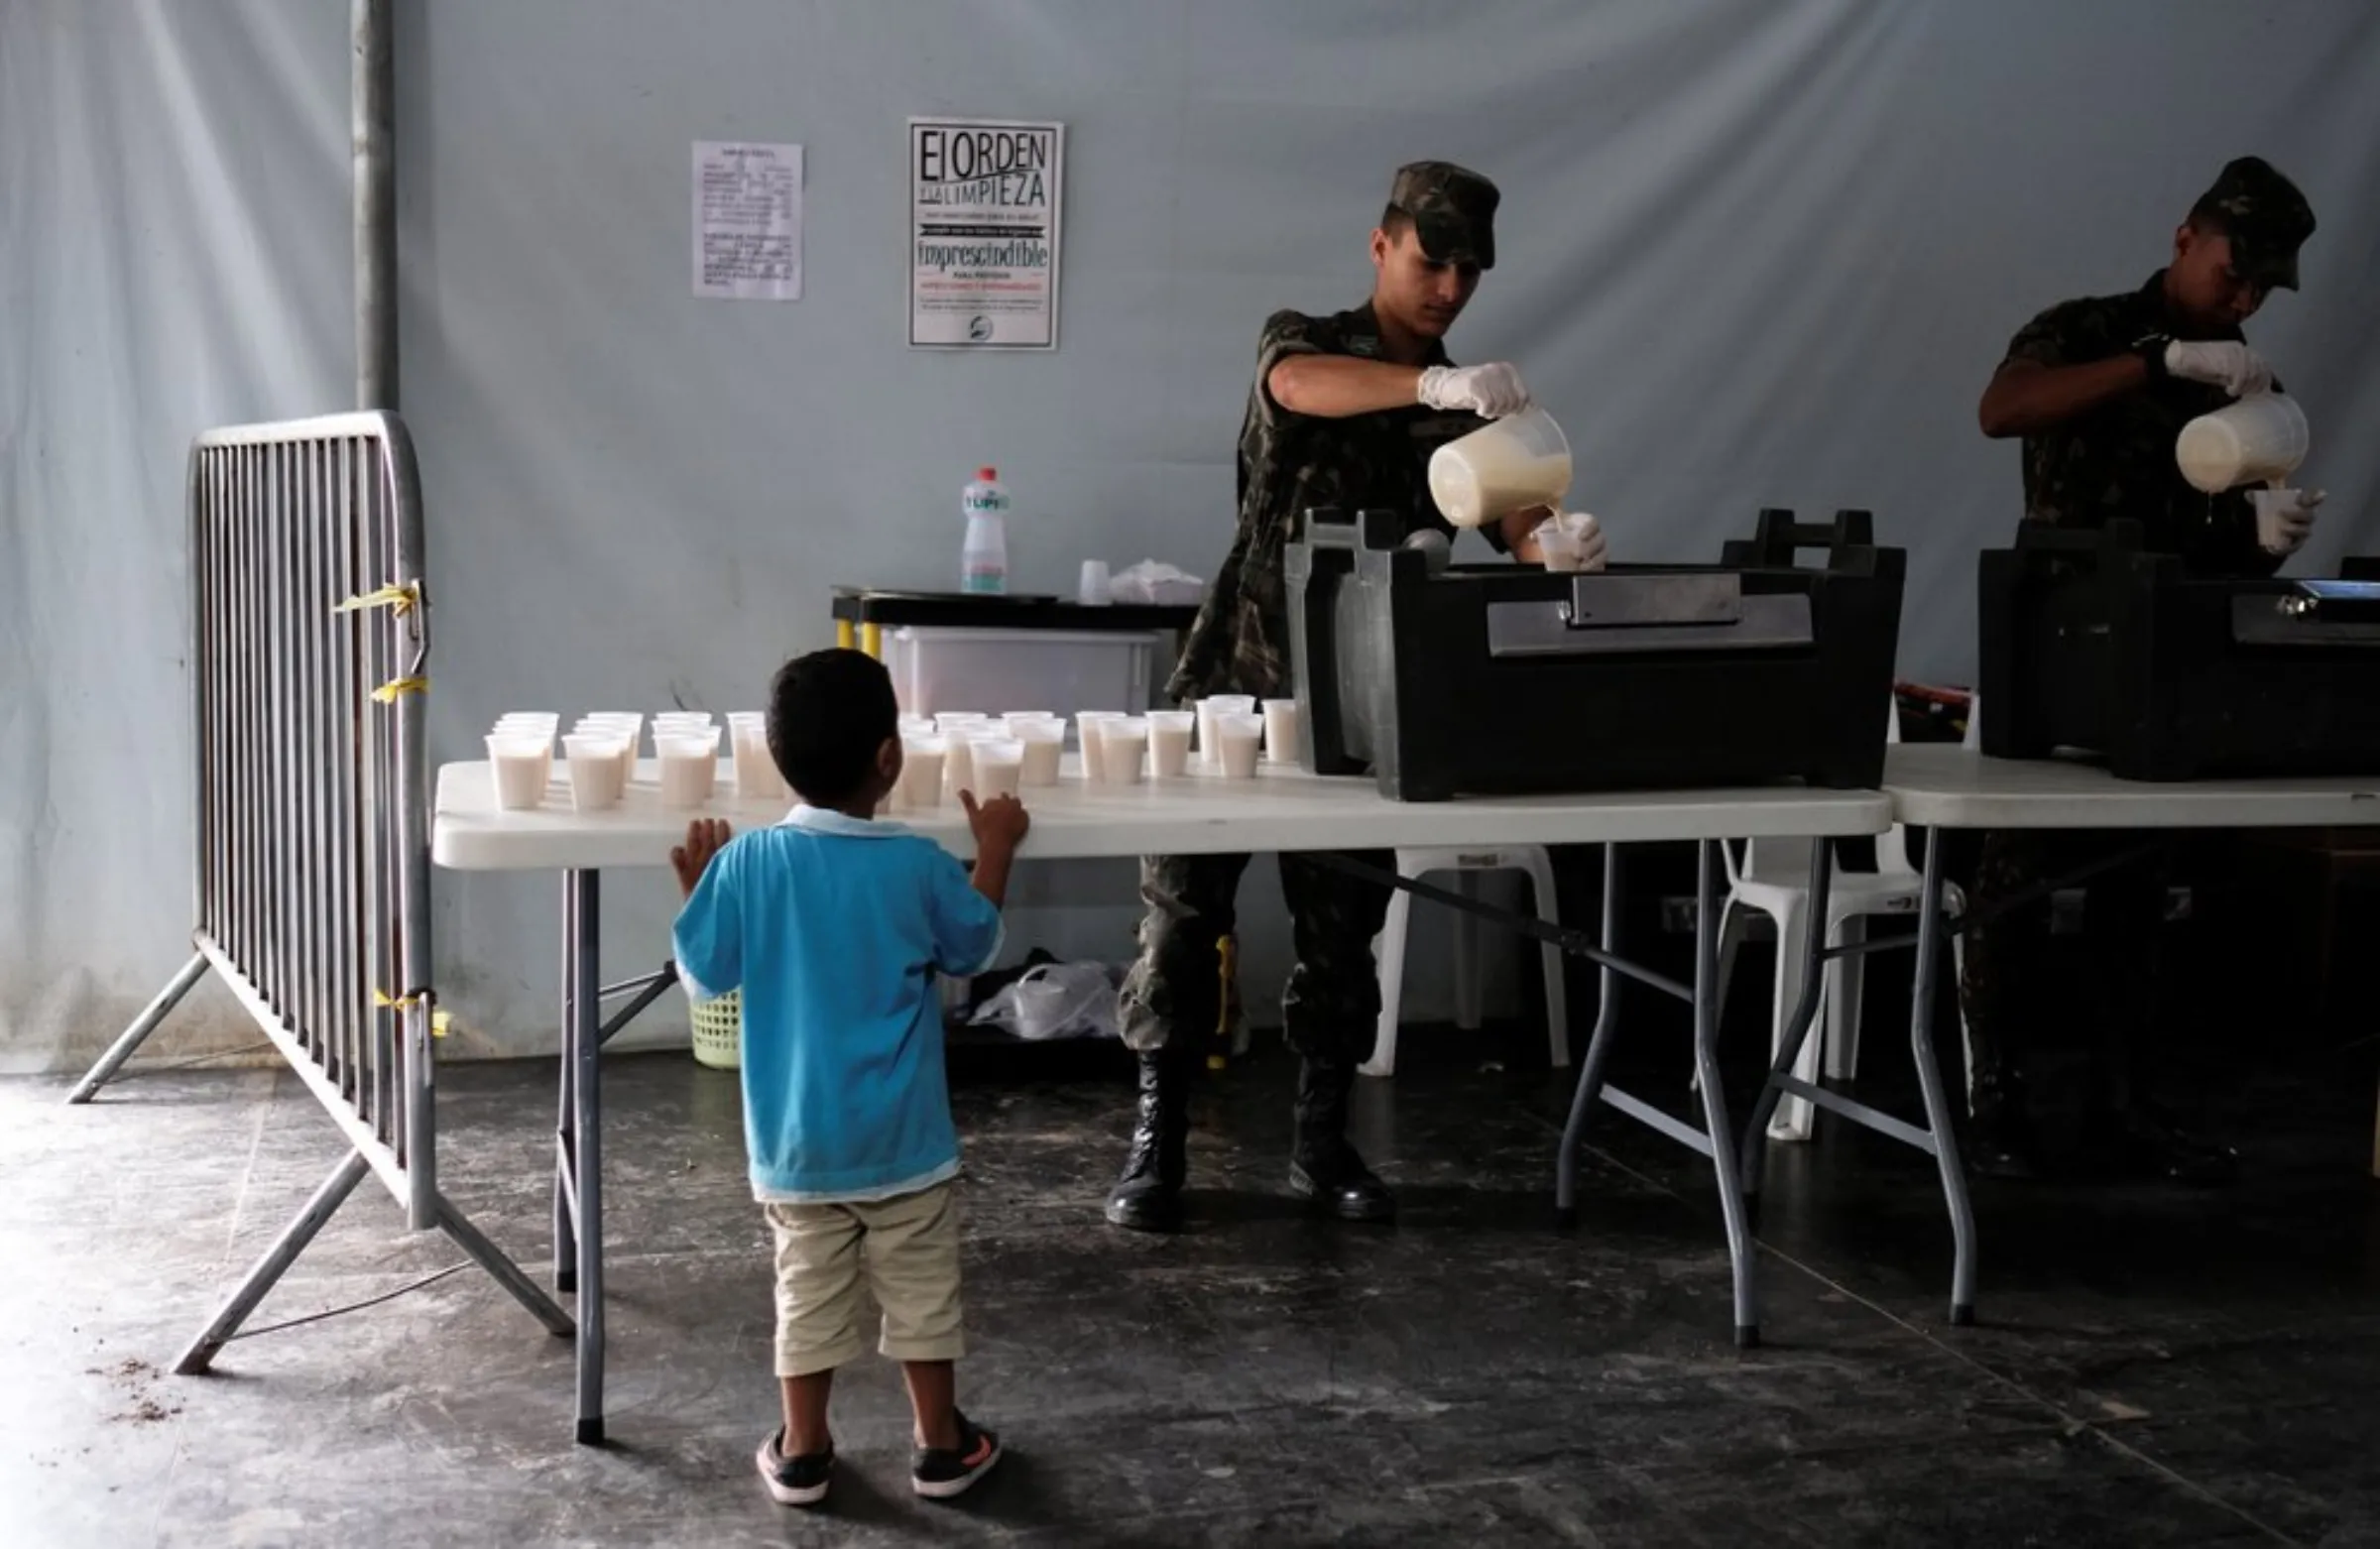 Military officers pour coffee with milk into plastic cups as a Venezuelan boy looks at them at the Pacaraima border control, Roraima state, Brazil August 8, 2018